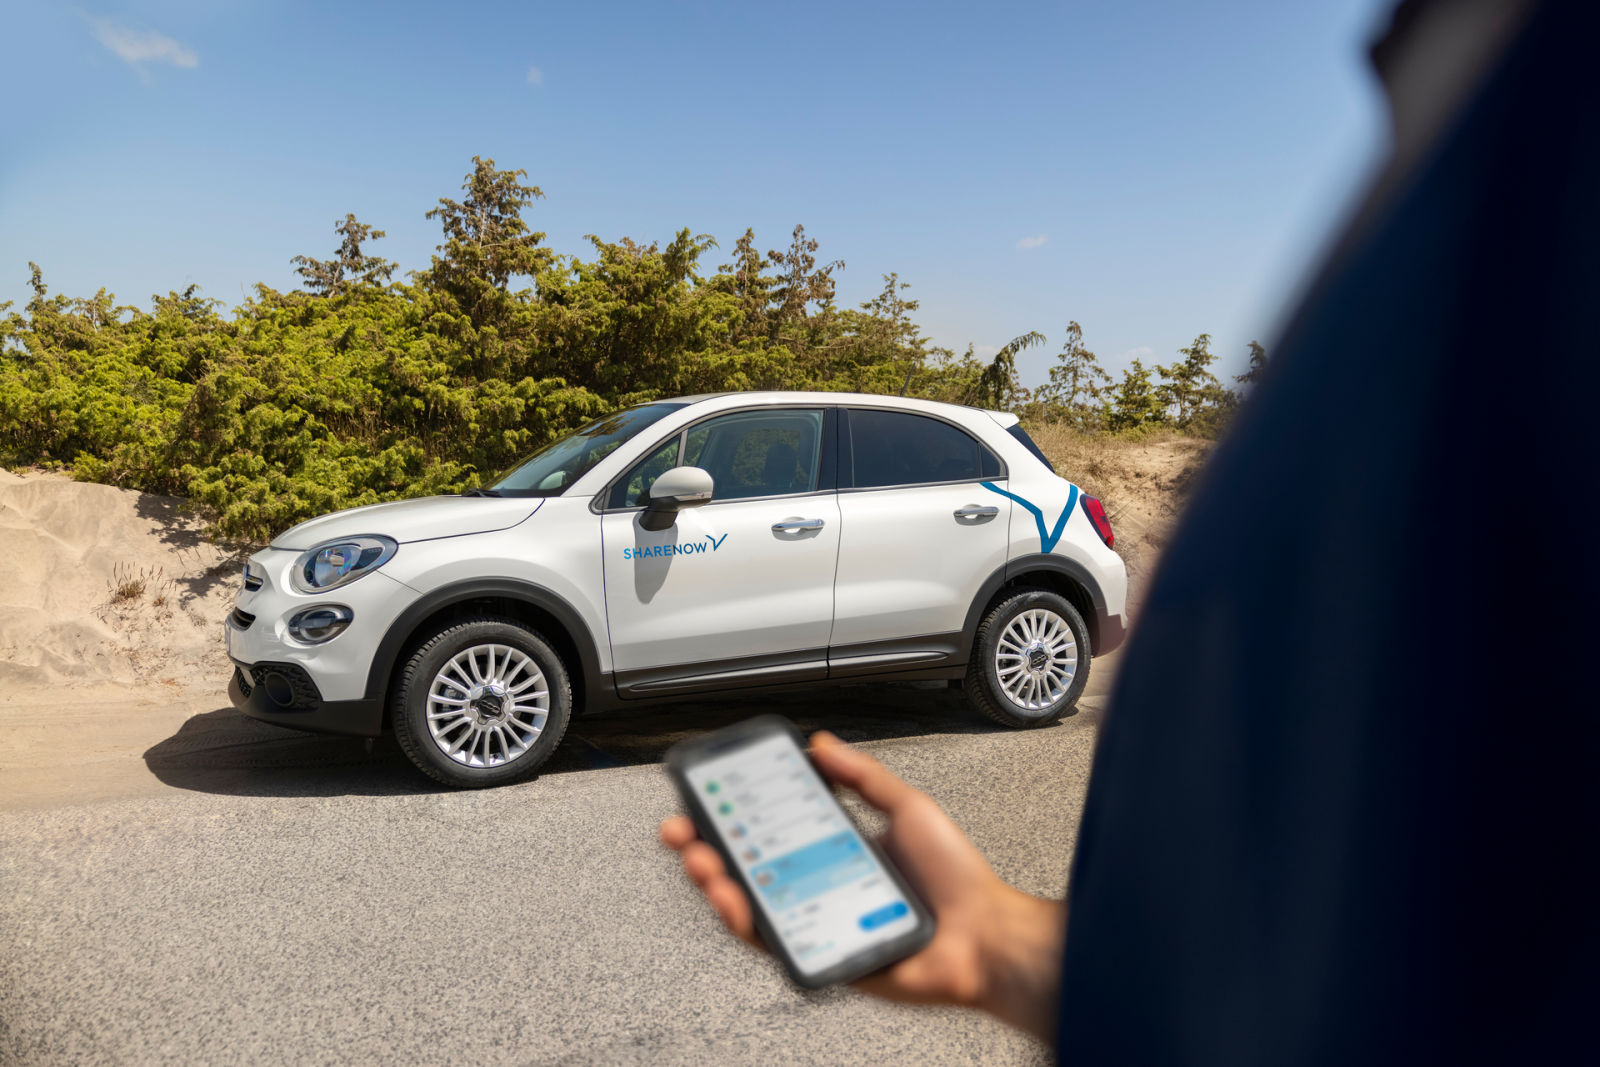 share-now-infleeting-fiat500x-rome-3 ID 8502 (2)